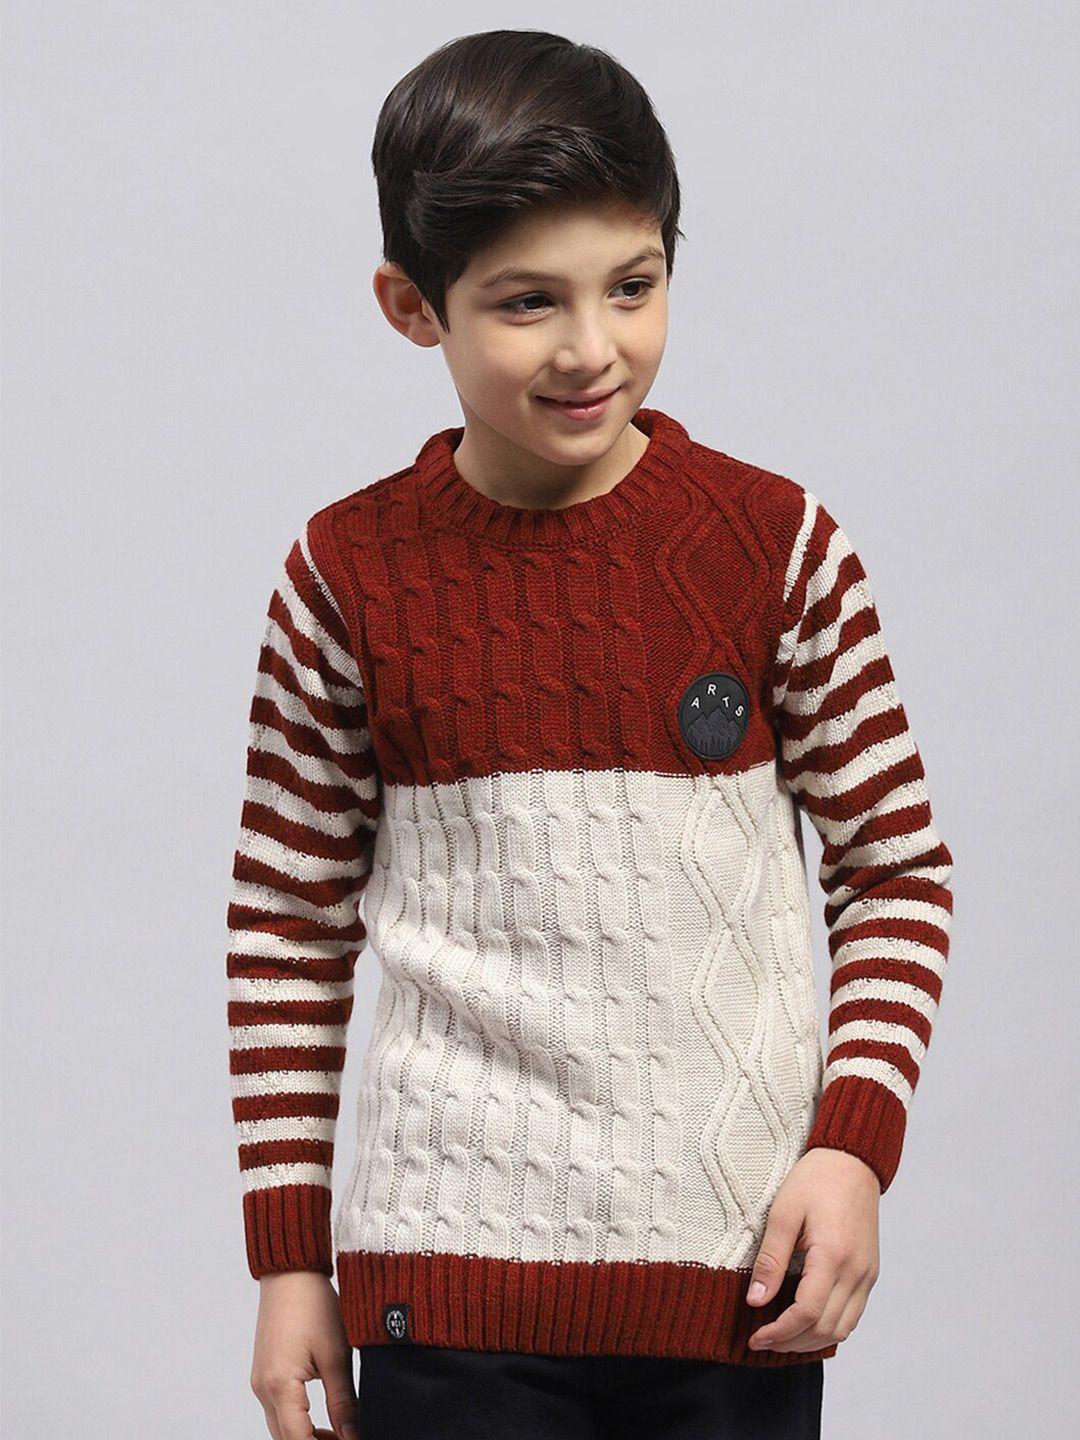 monte-carlo-boys-round-neck-acrylic-cable-knit-pullover